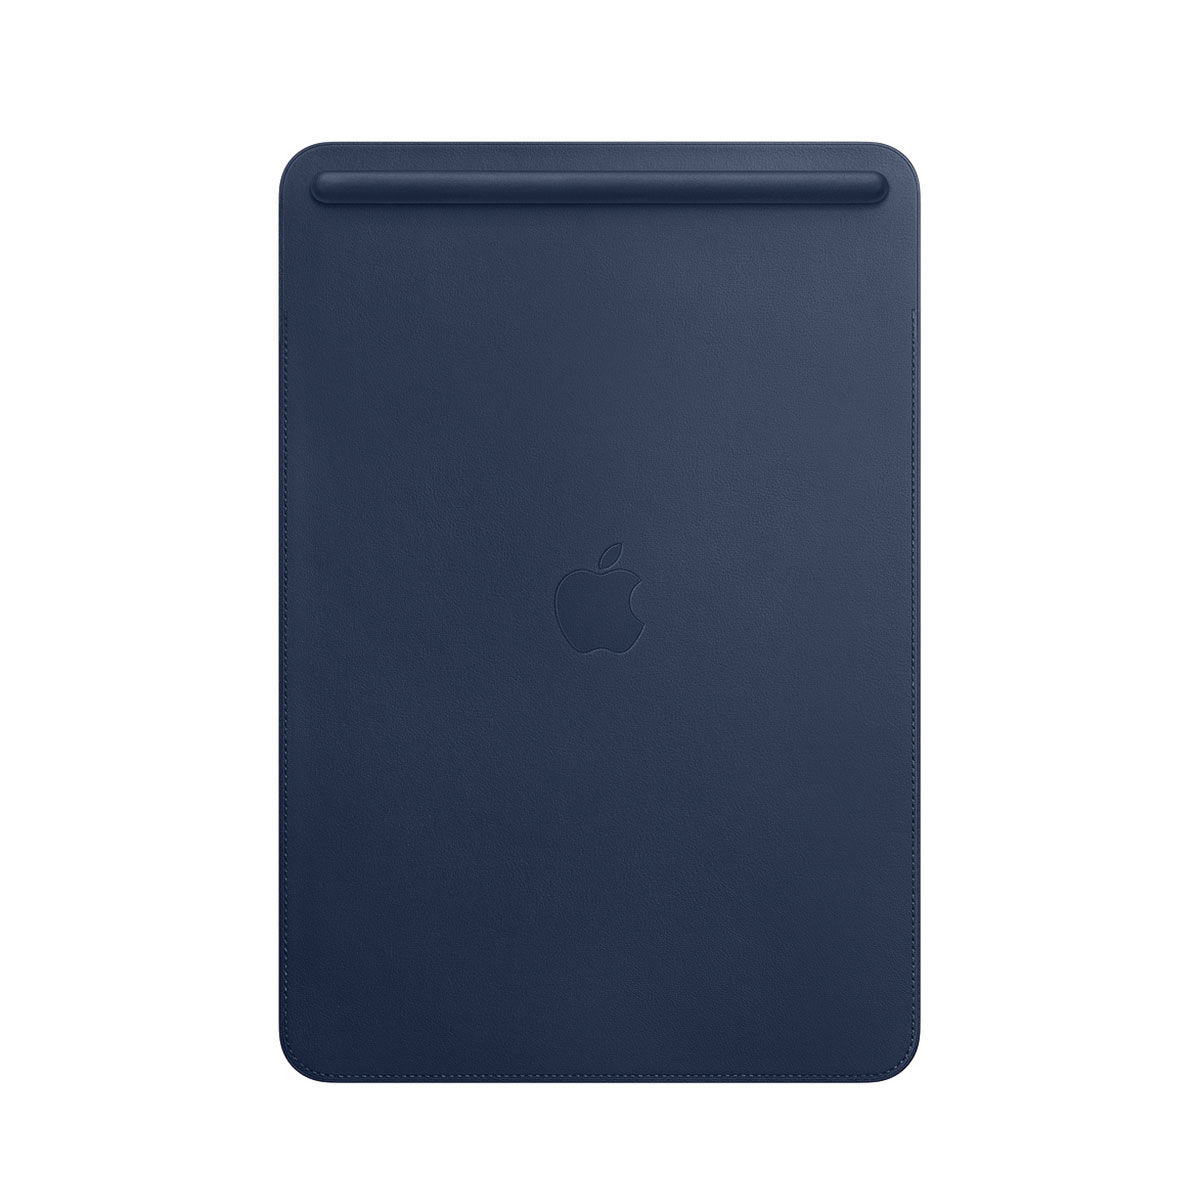 Apple Leather Sleeve for 10.5‑inch iPad Pro - Midnight Blue